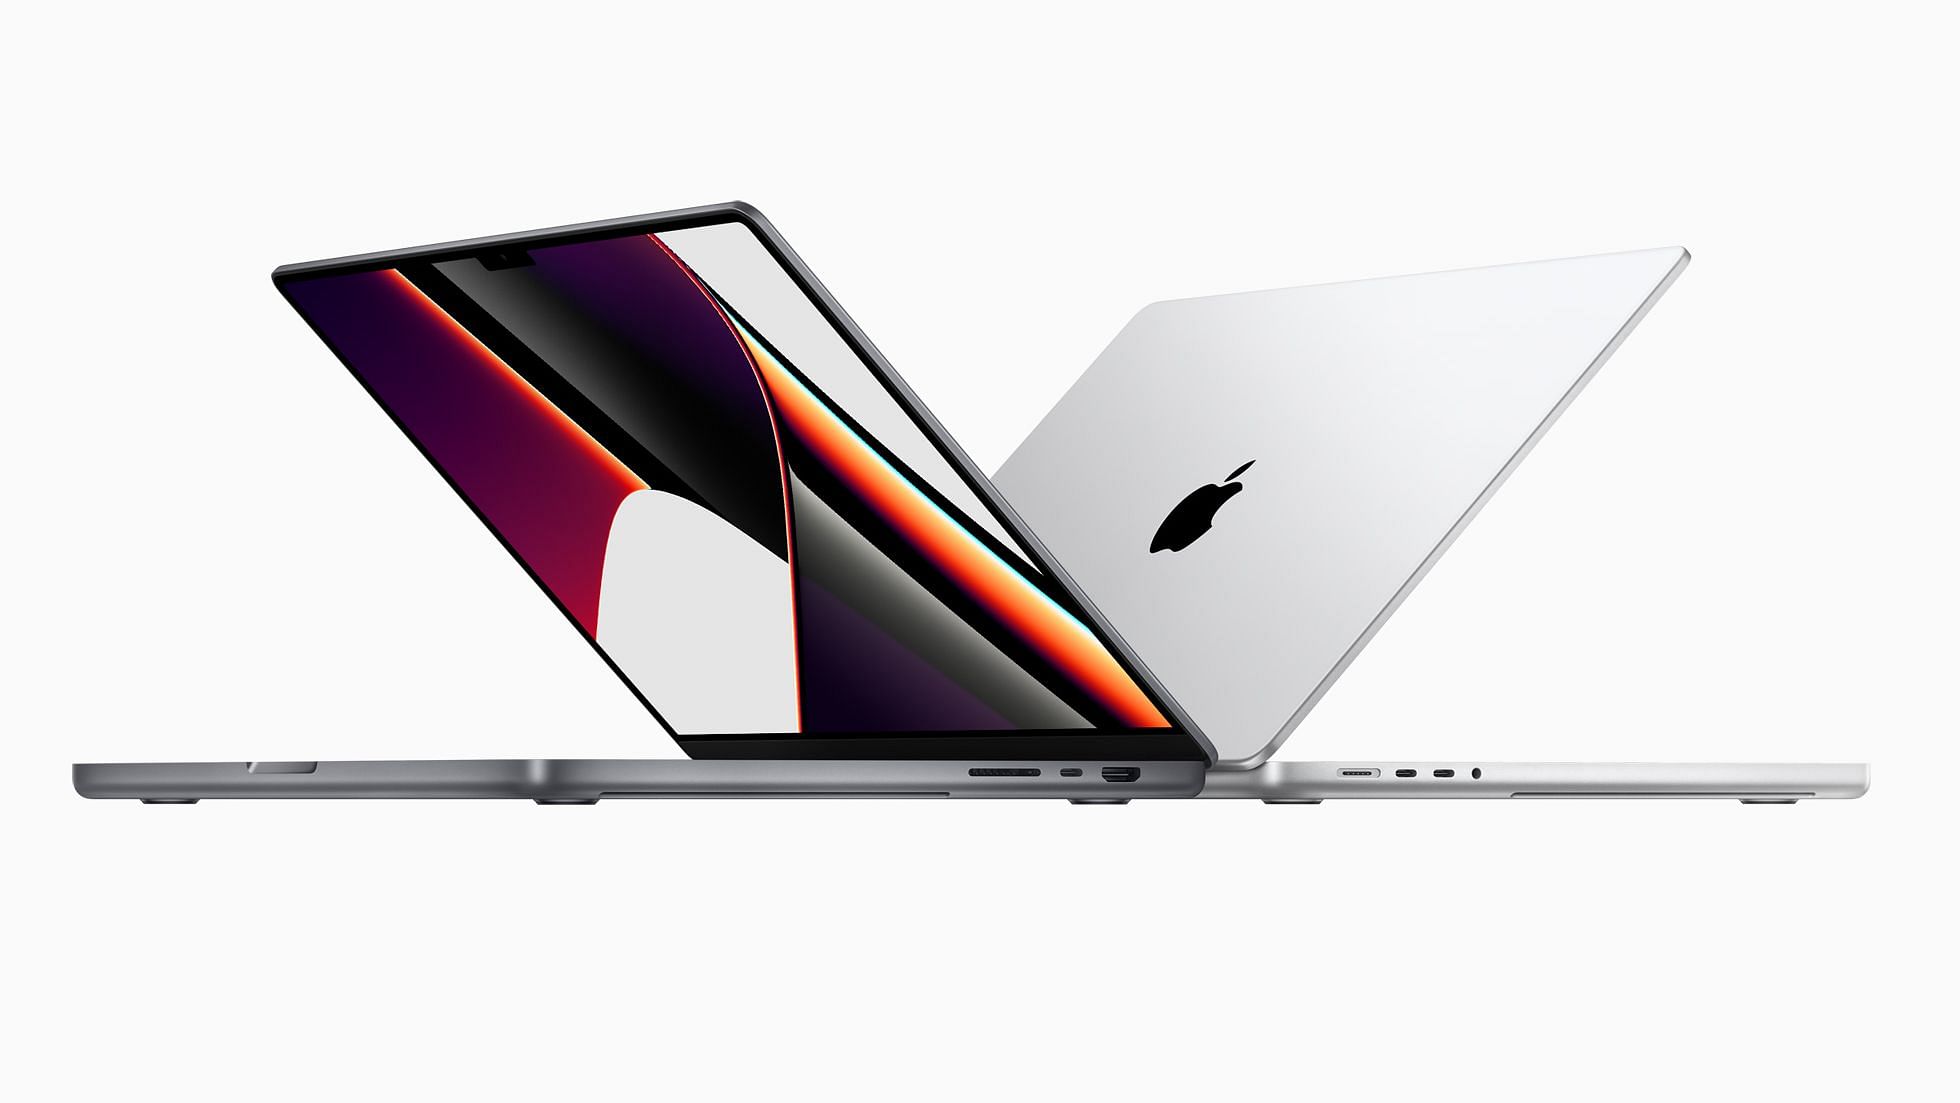 Apple 'Unleashed': MacBook Pros With M1 Pro & M1 Max Chips, AirPods 3